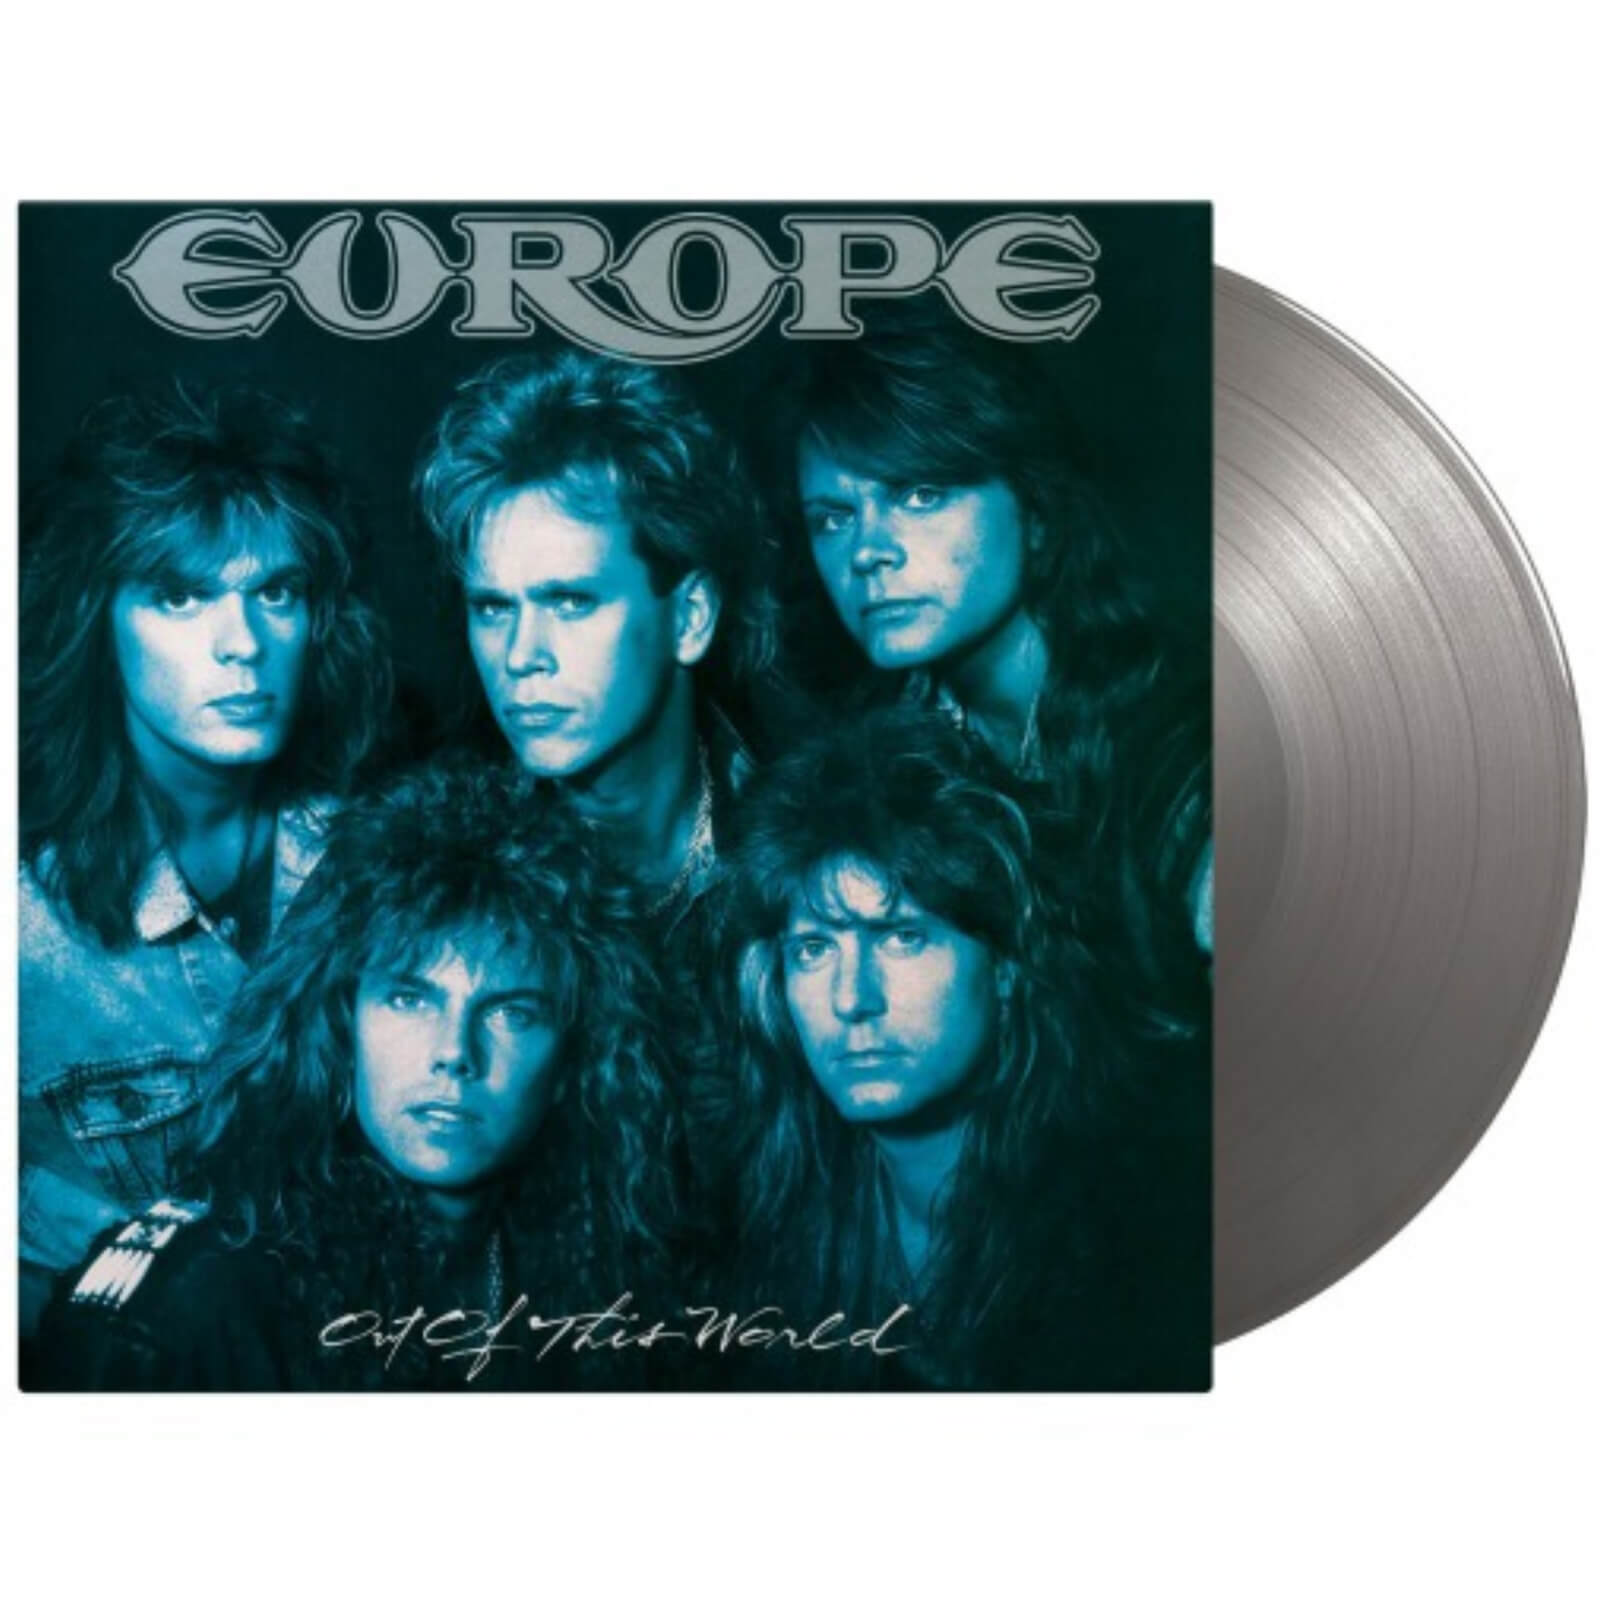 Europe - Out Of This World 180g Vinyl (Silver)